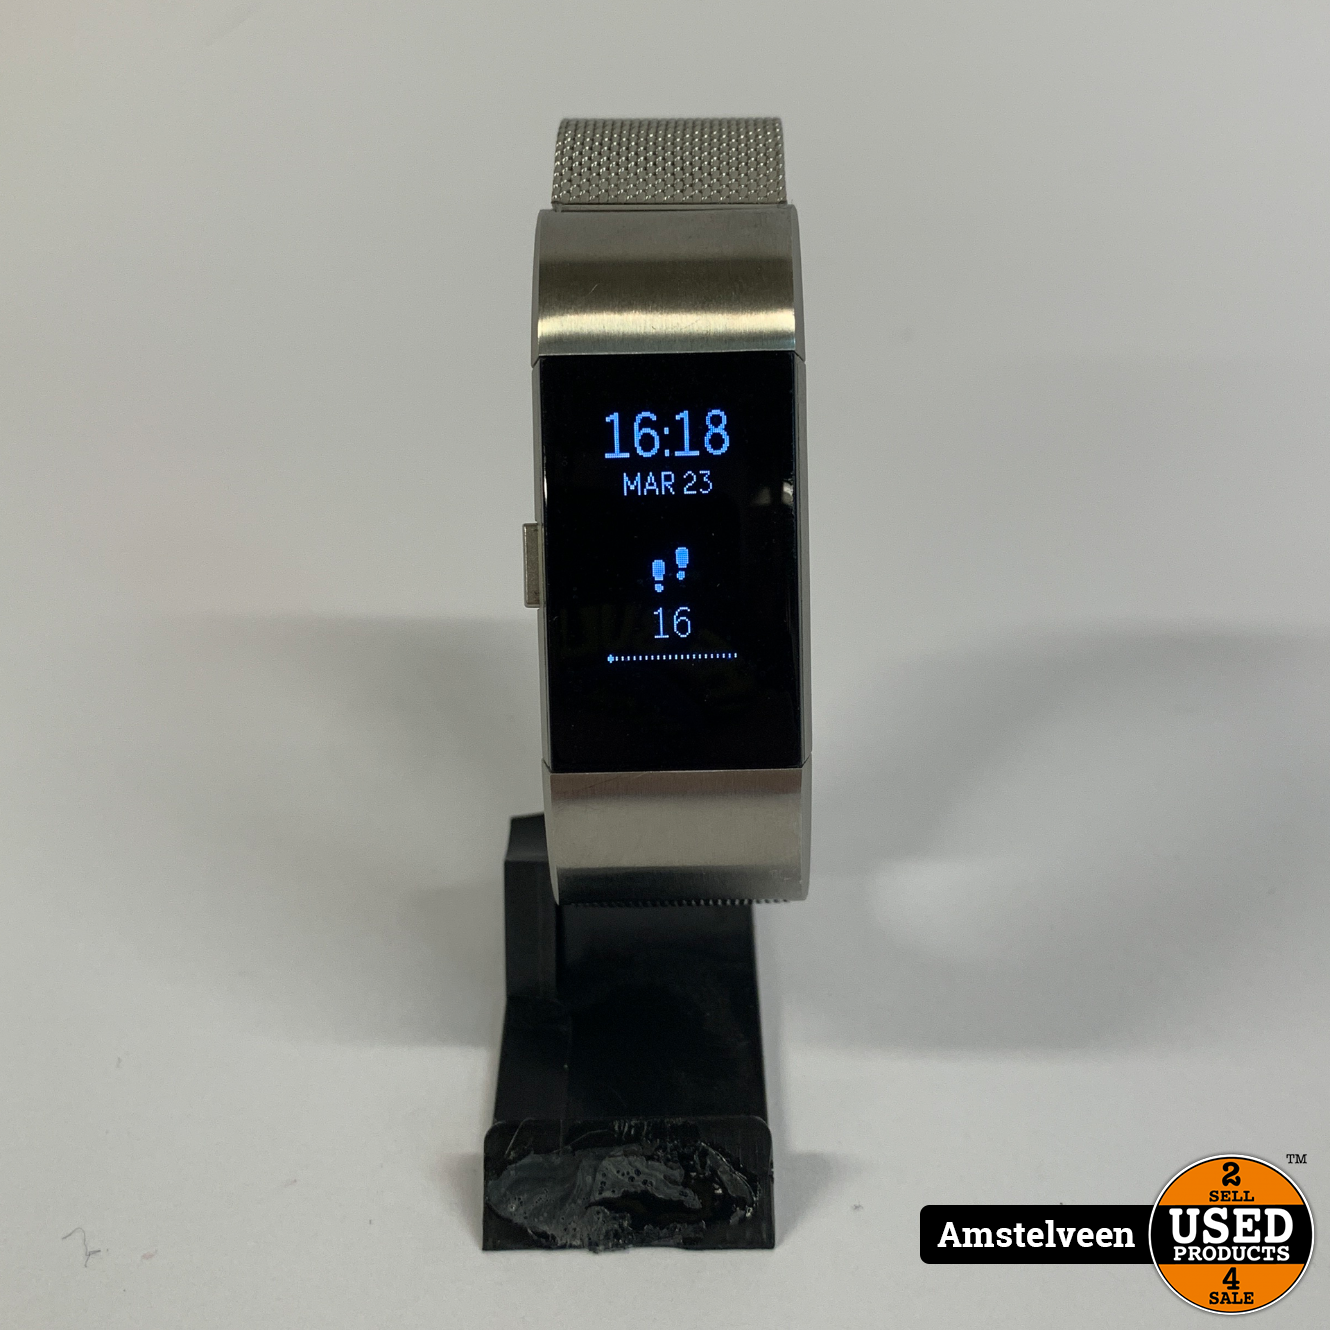 Mechanica Laptop Sitcom Fitbit Charge 2 | Nette Staat - Used Products Amstelveen